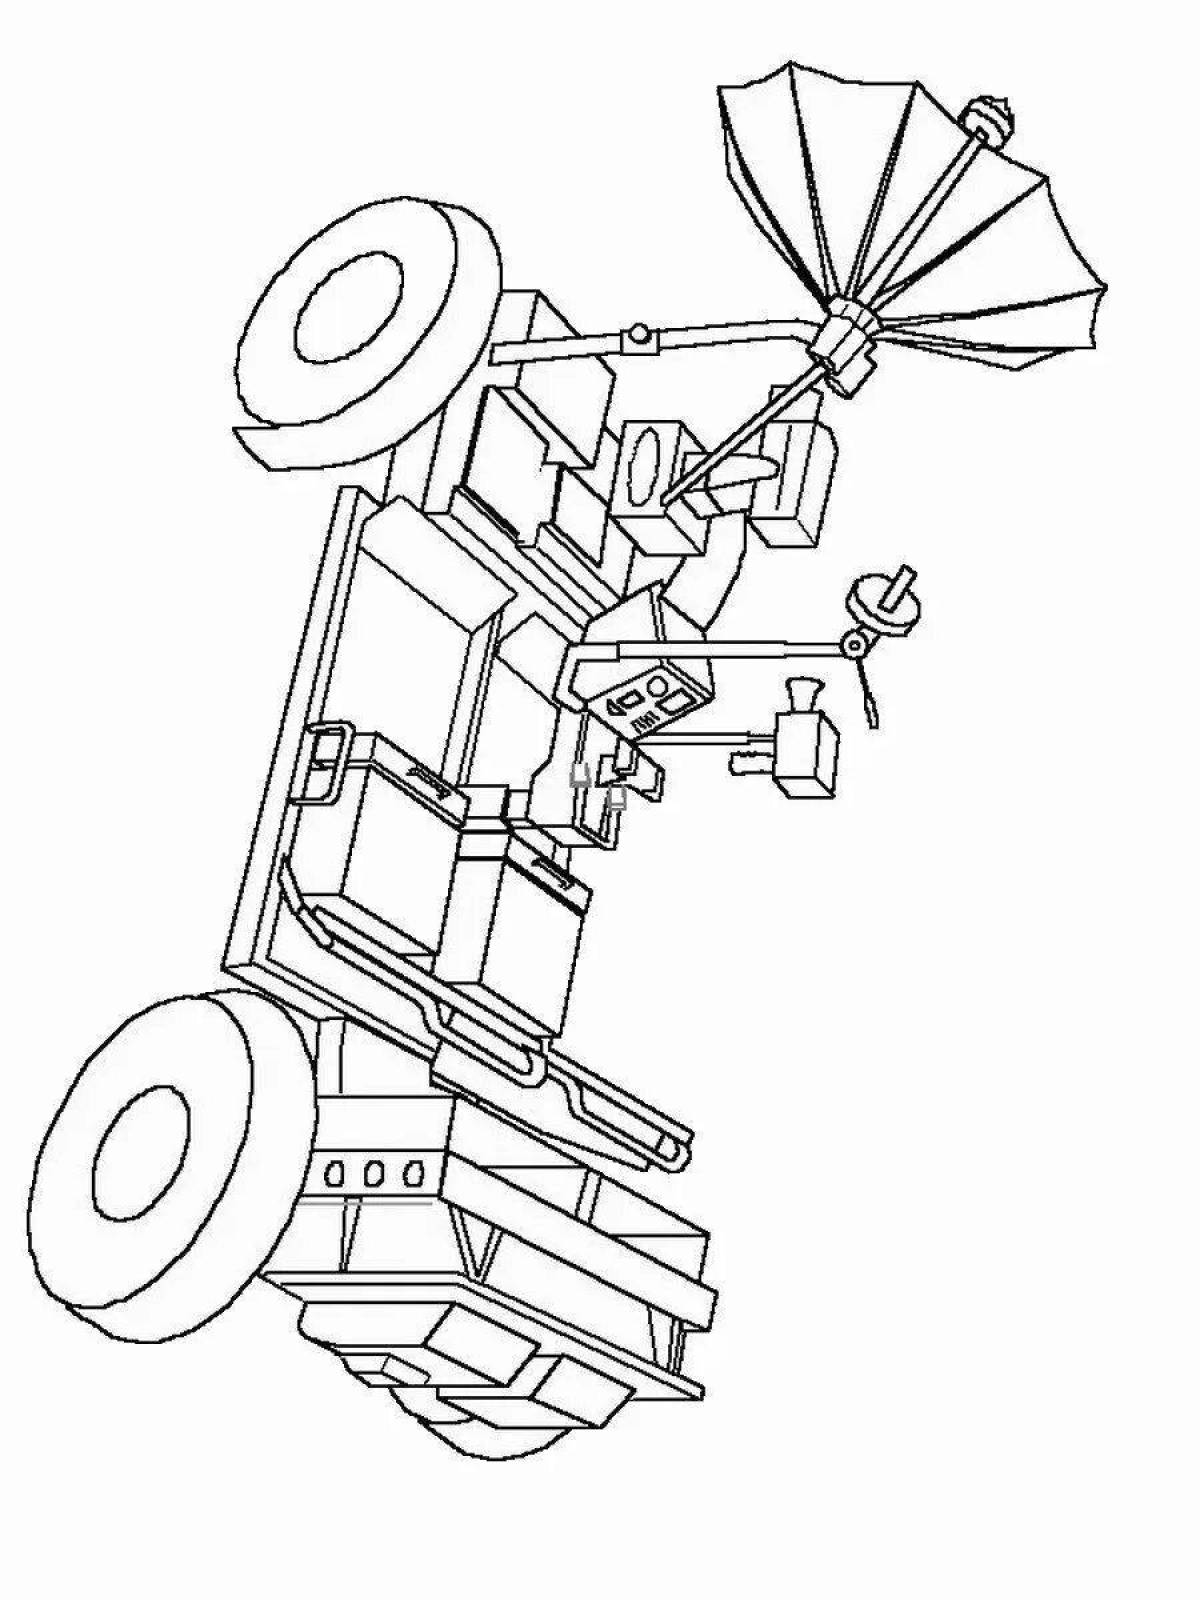 Animated lunar rover coloring page